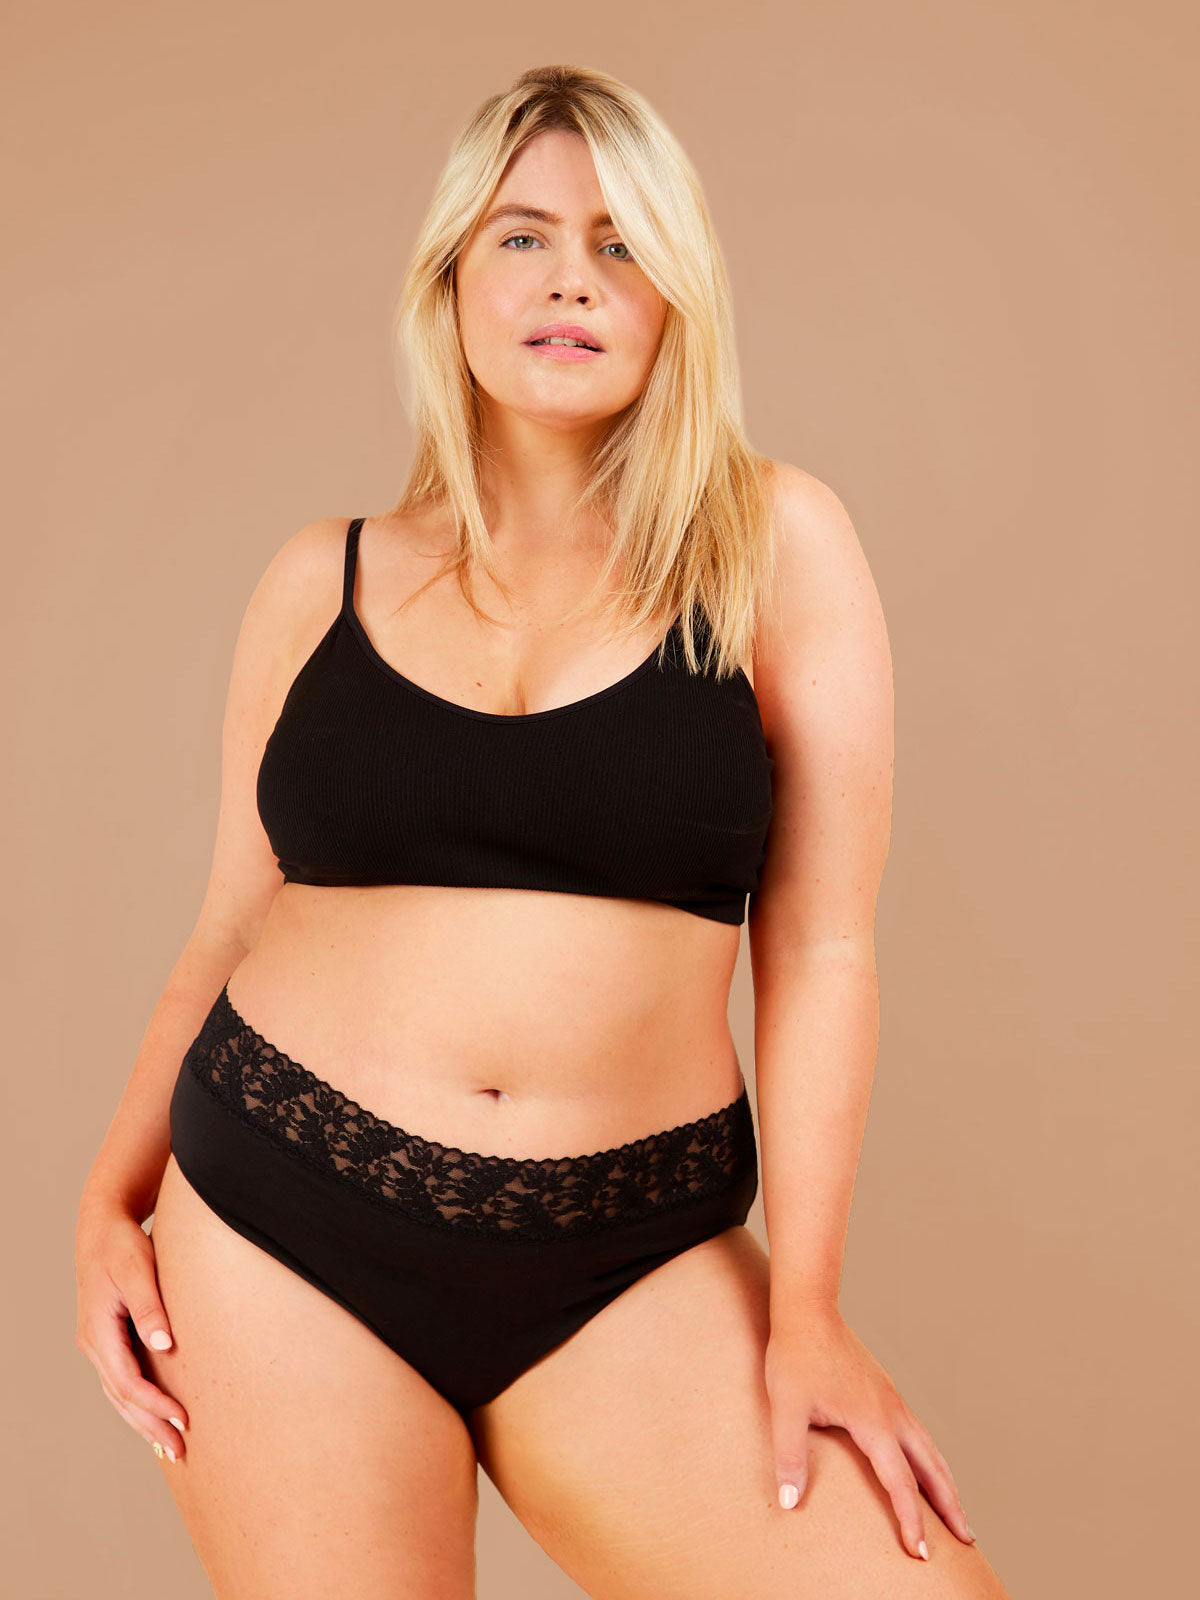 A blonde woman stands wearing a black bra and black period pants adorned with a lacey floral trim, looking content and directly at the camera.